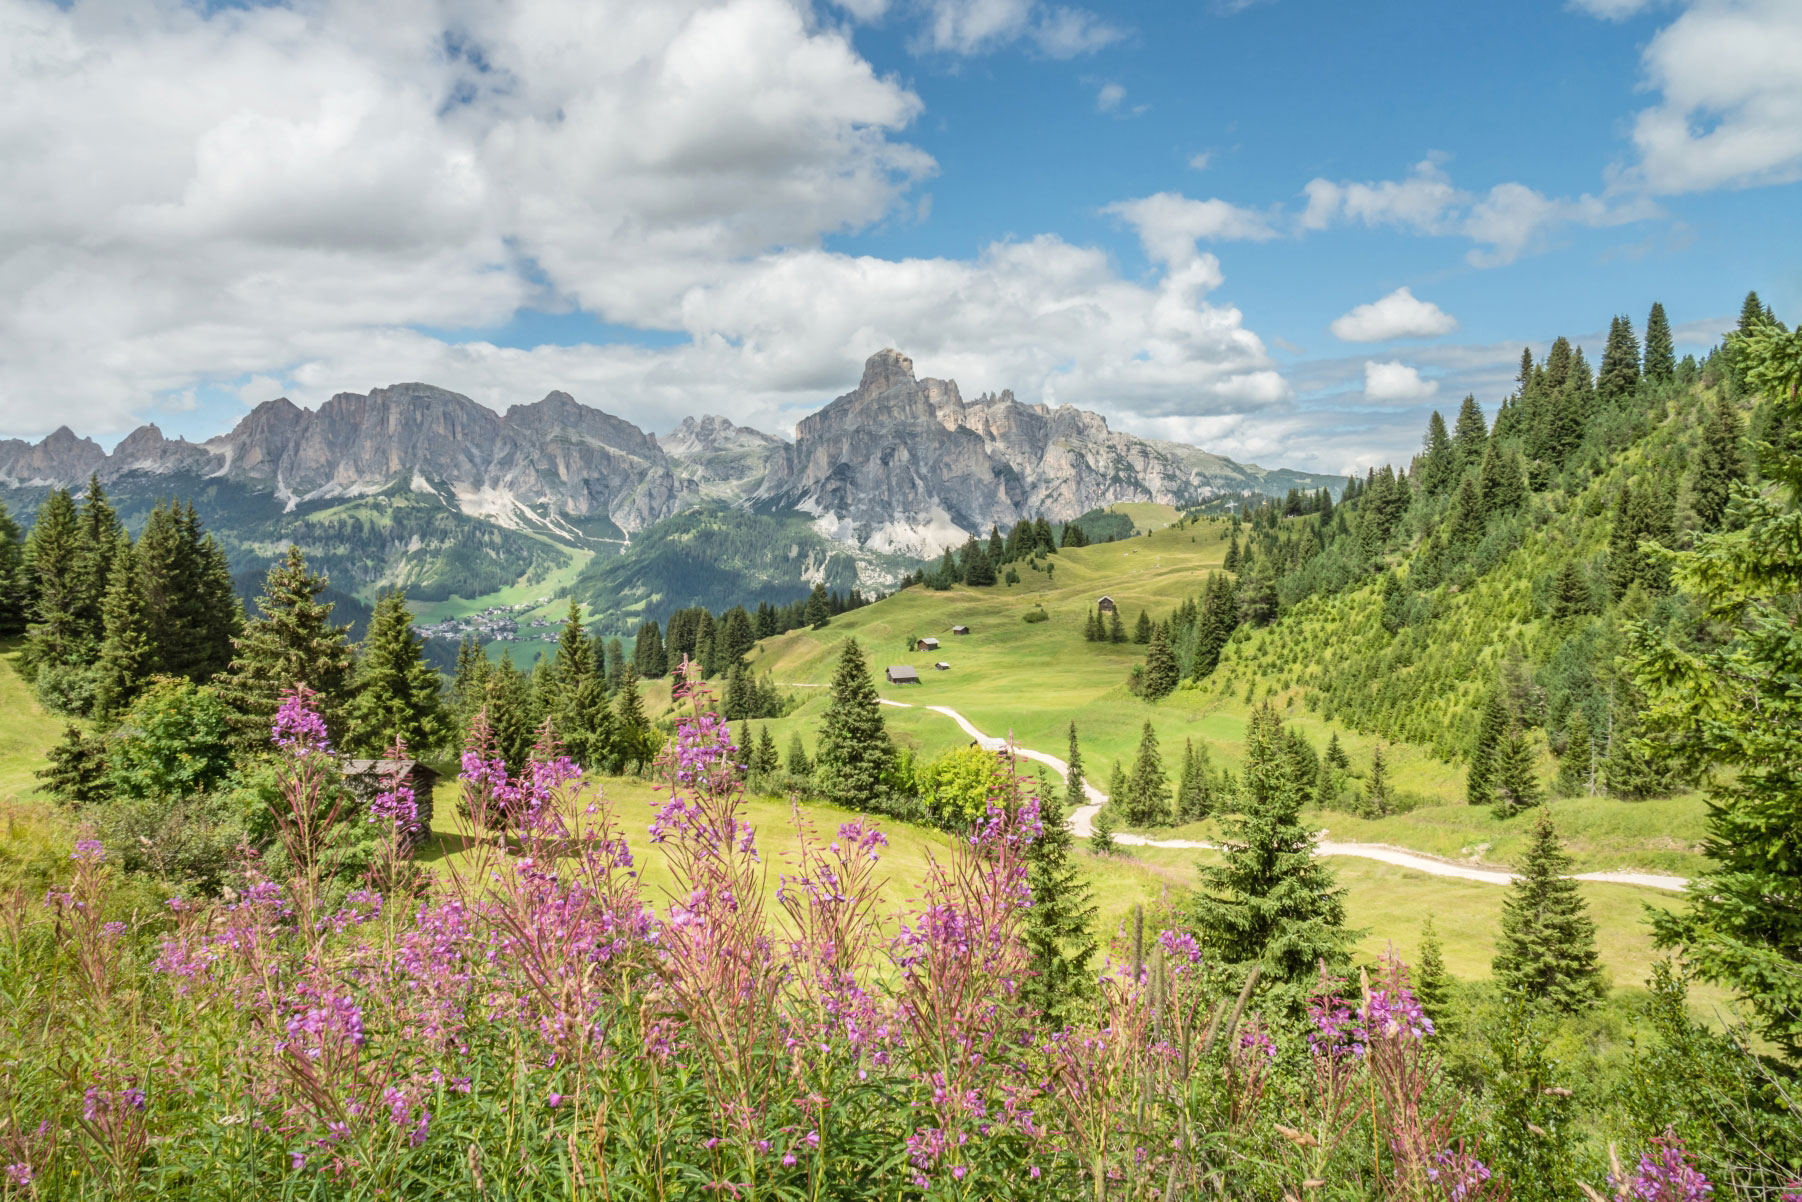 Alta Badia Sassongher By Paola Finali